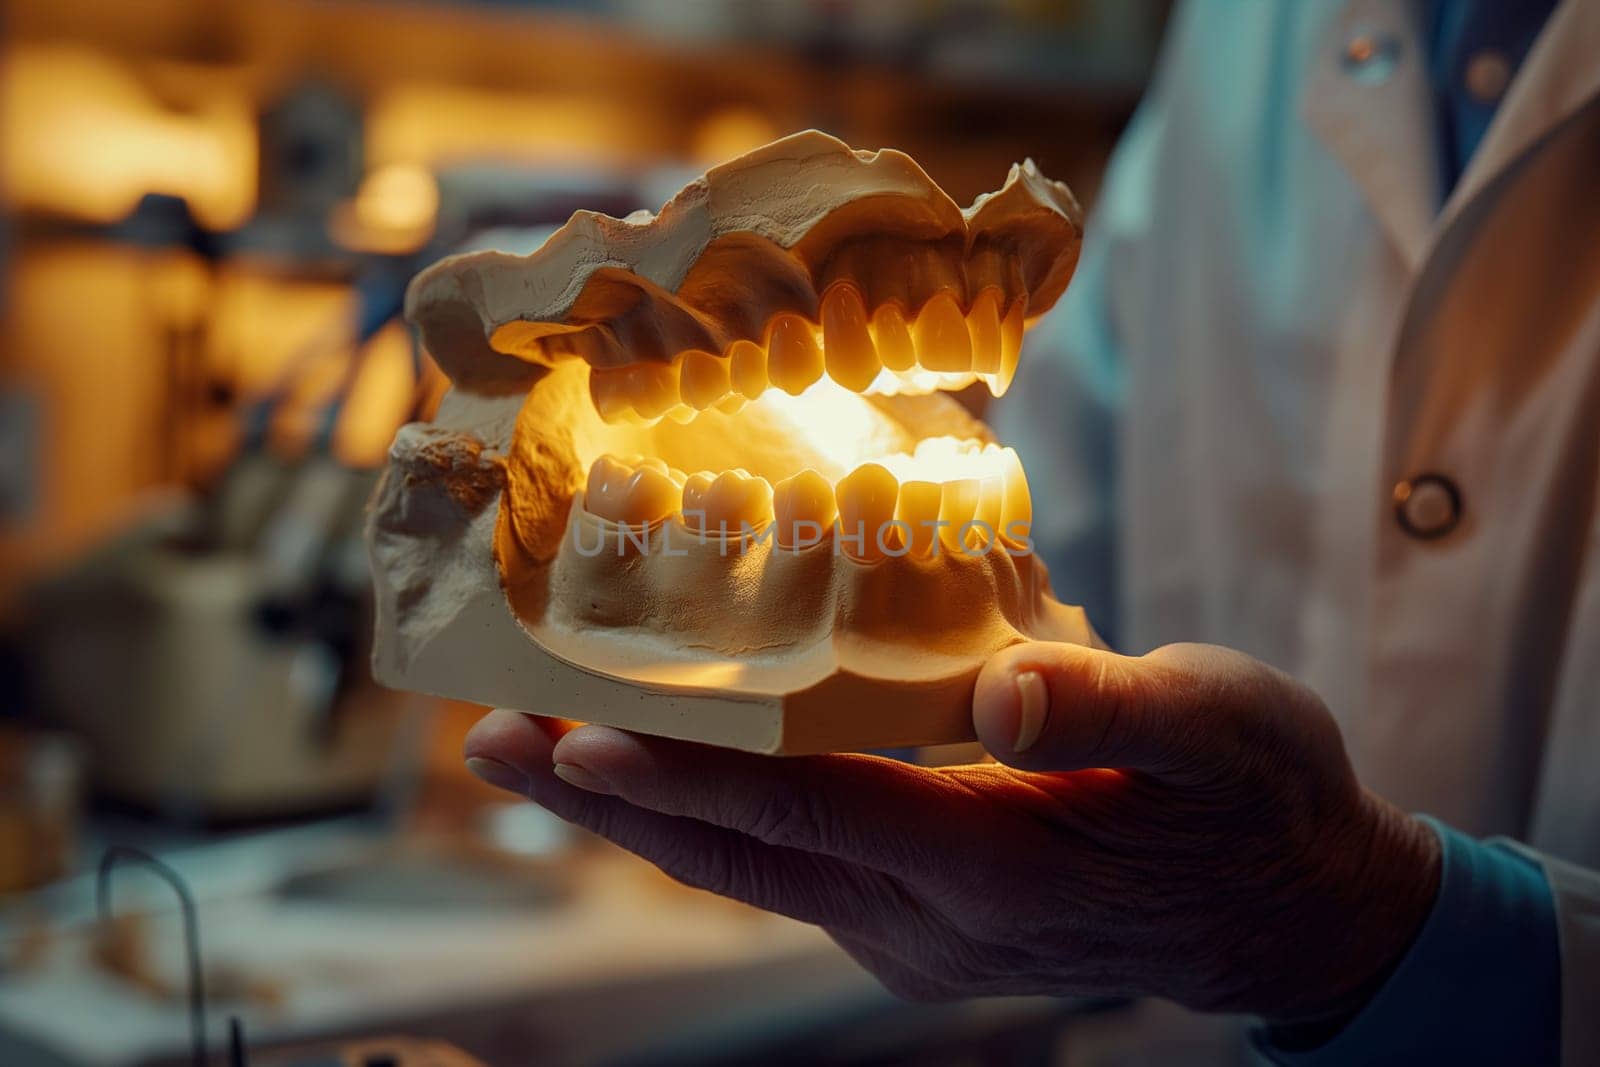 A person is holding a detailed model of a tooth, examining it closely.